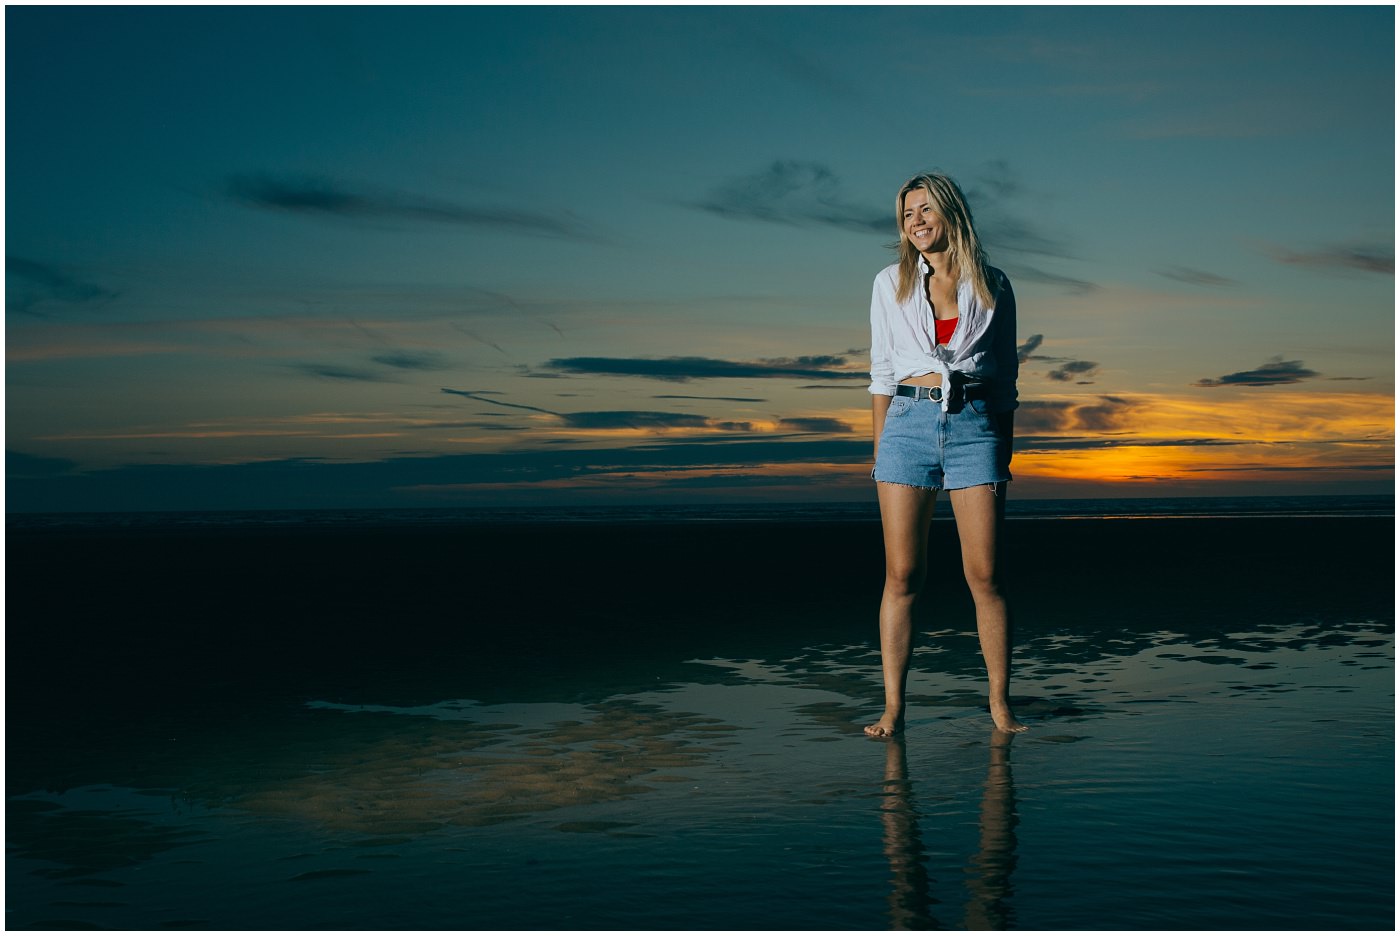 Model on Formby Beach at sunset